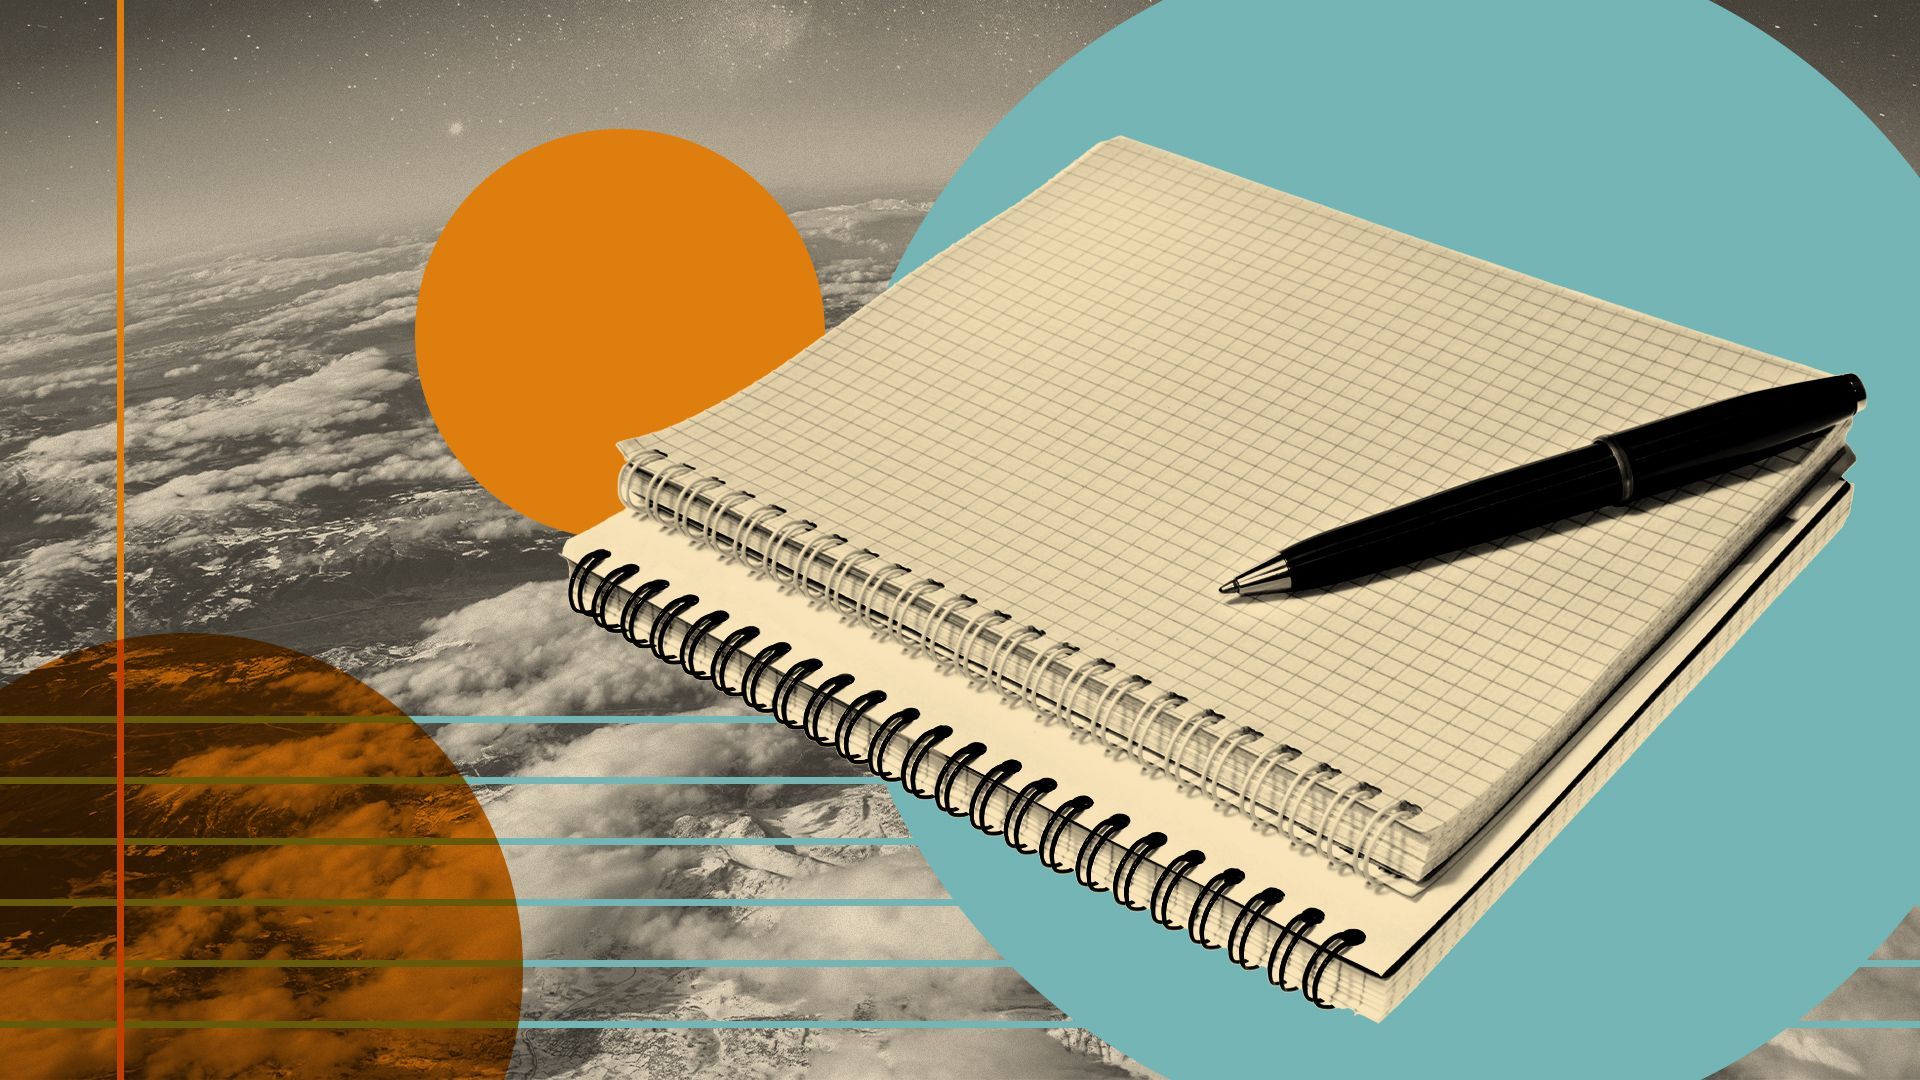 Illustration of a pen and notebook surrounded by abstract shapes and a photo of the Earth's atmosphere.